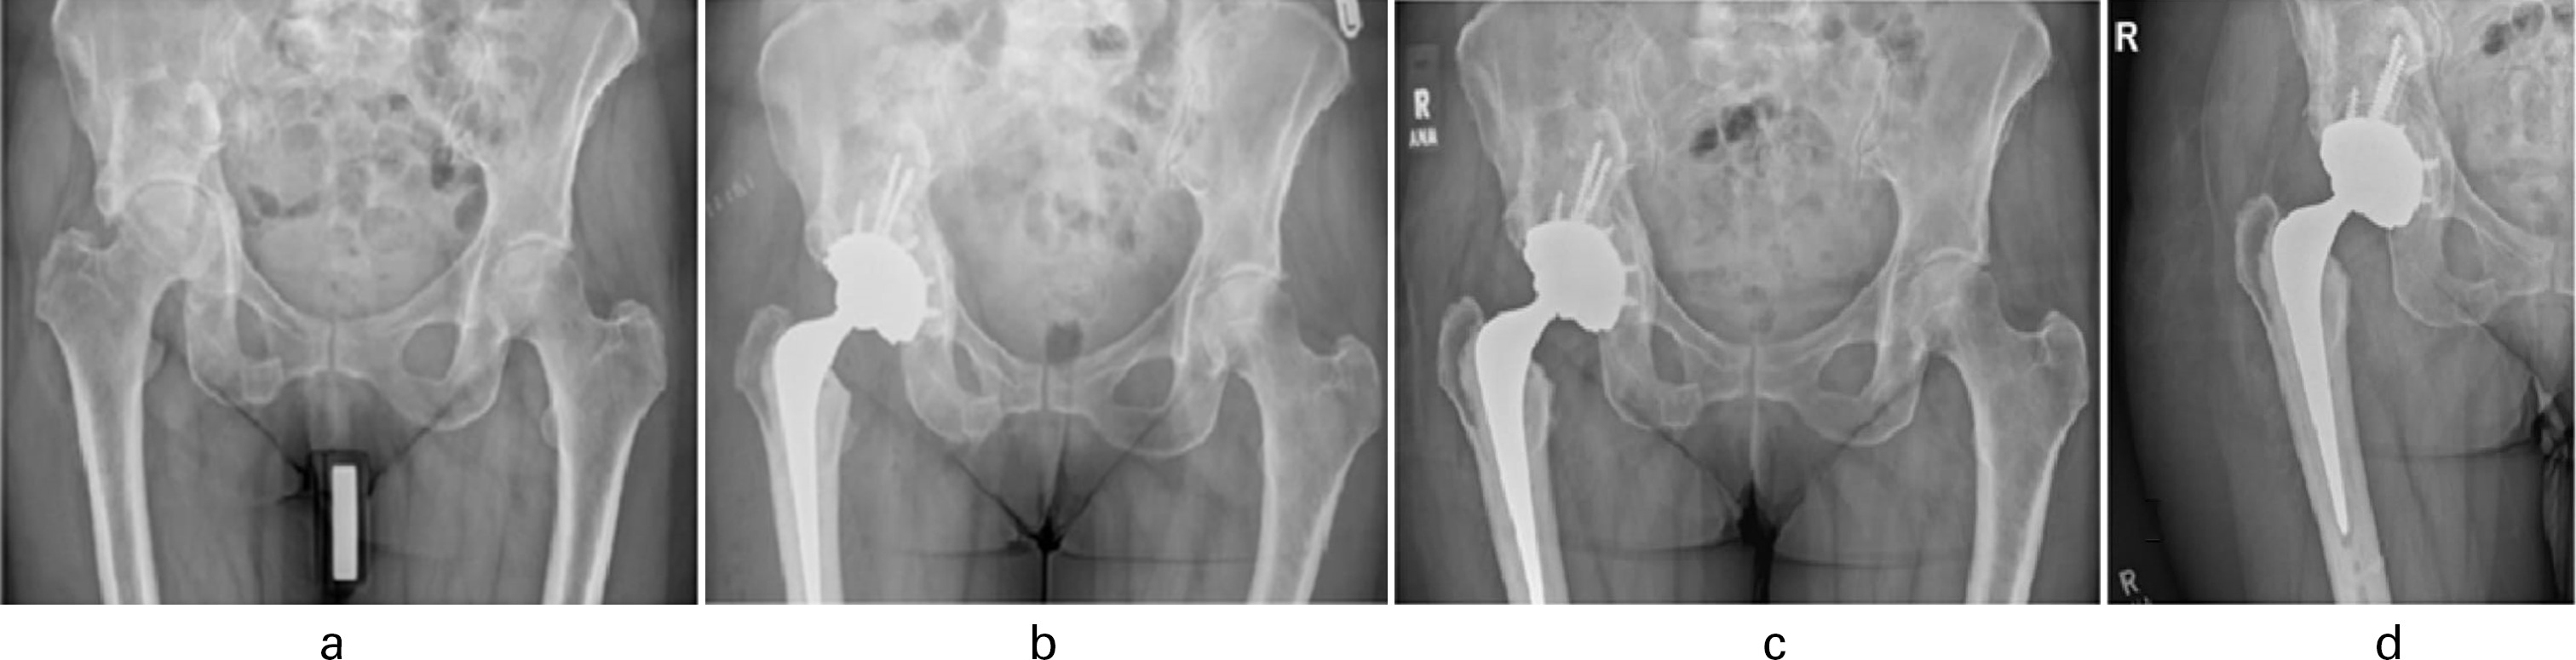 Fig. 3 
            73-year-old female patient who had a delayed right-sided uncemented total hip arthroplasty (THA). a) Preoperative anteroposterior (AP) radiograph showing osteoarthritis of right hip. b) Immediate postoperative AP radiograph view with right THA. c) and d) AP radiograph view after one-year follow-up following right THA.
          